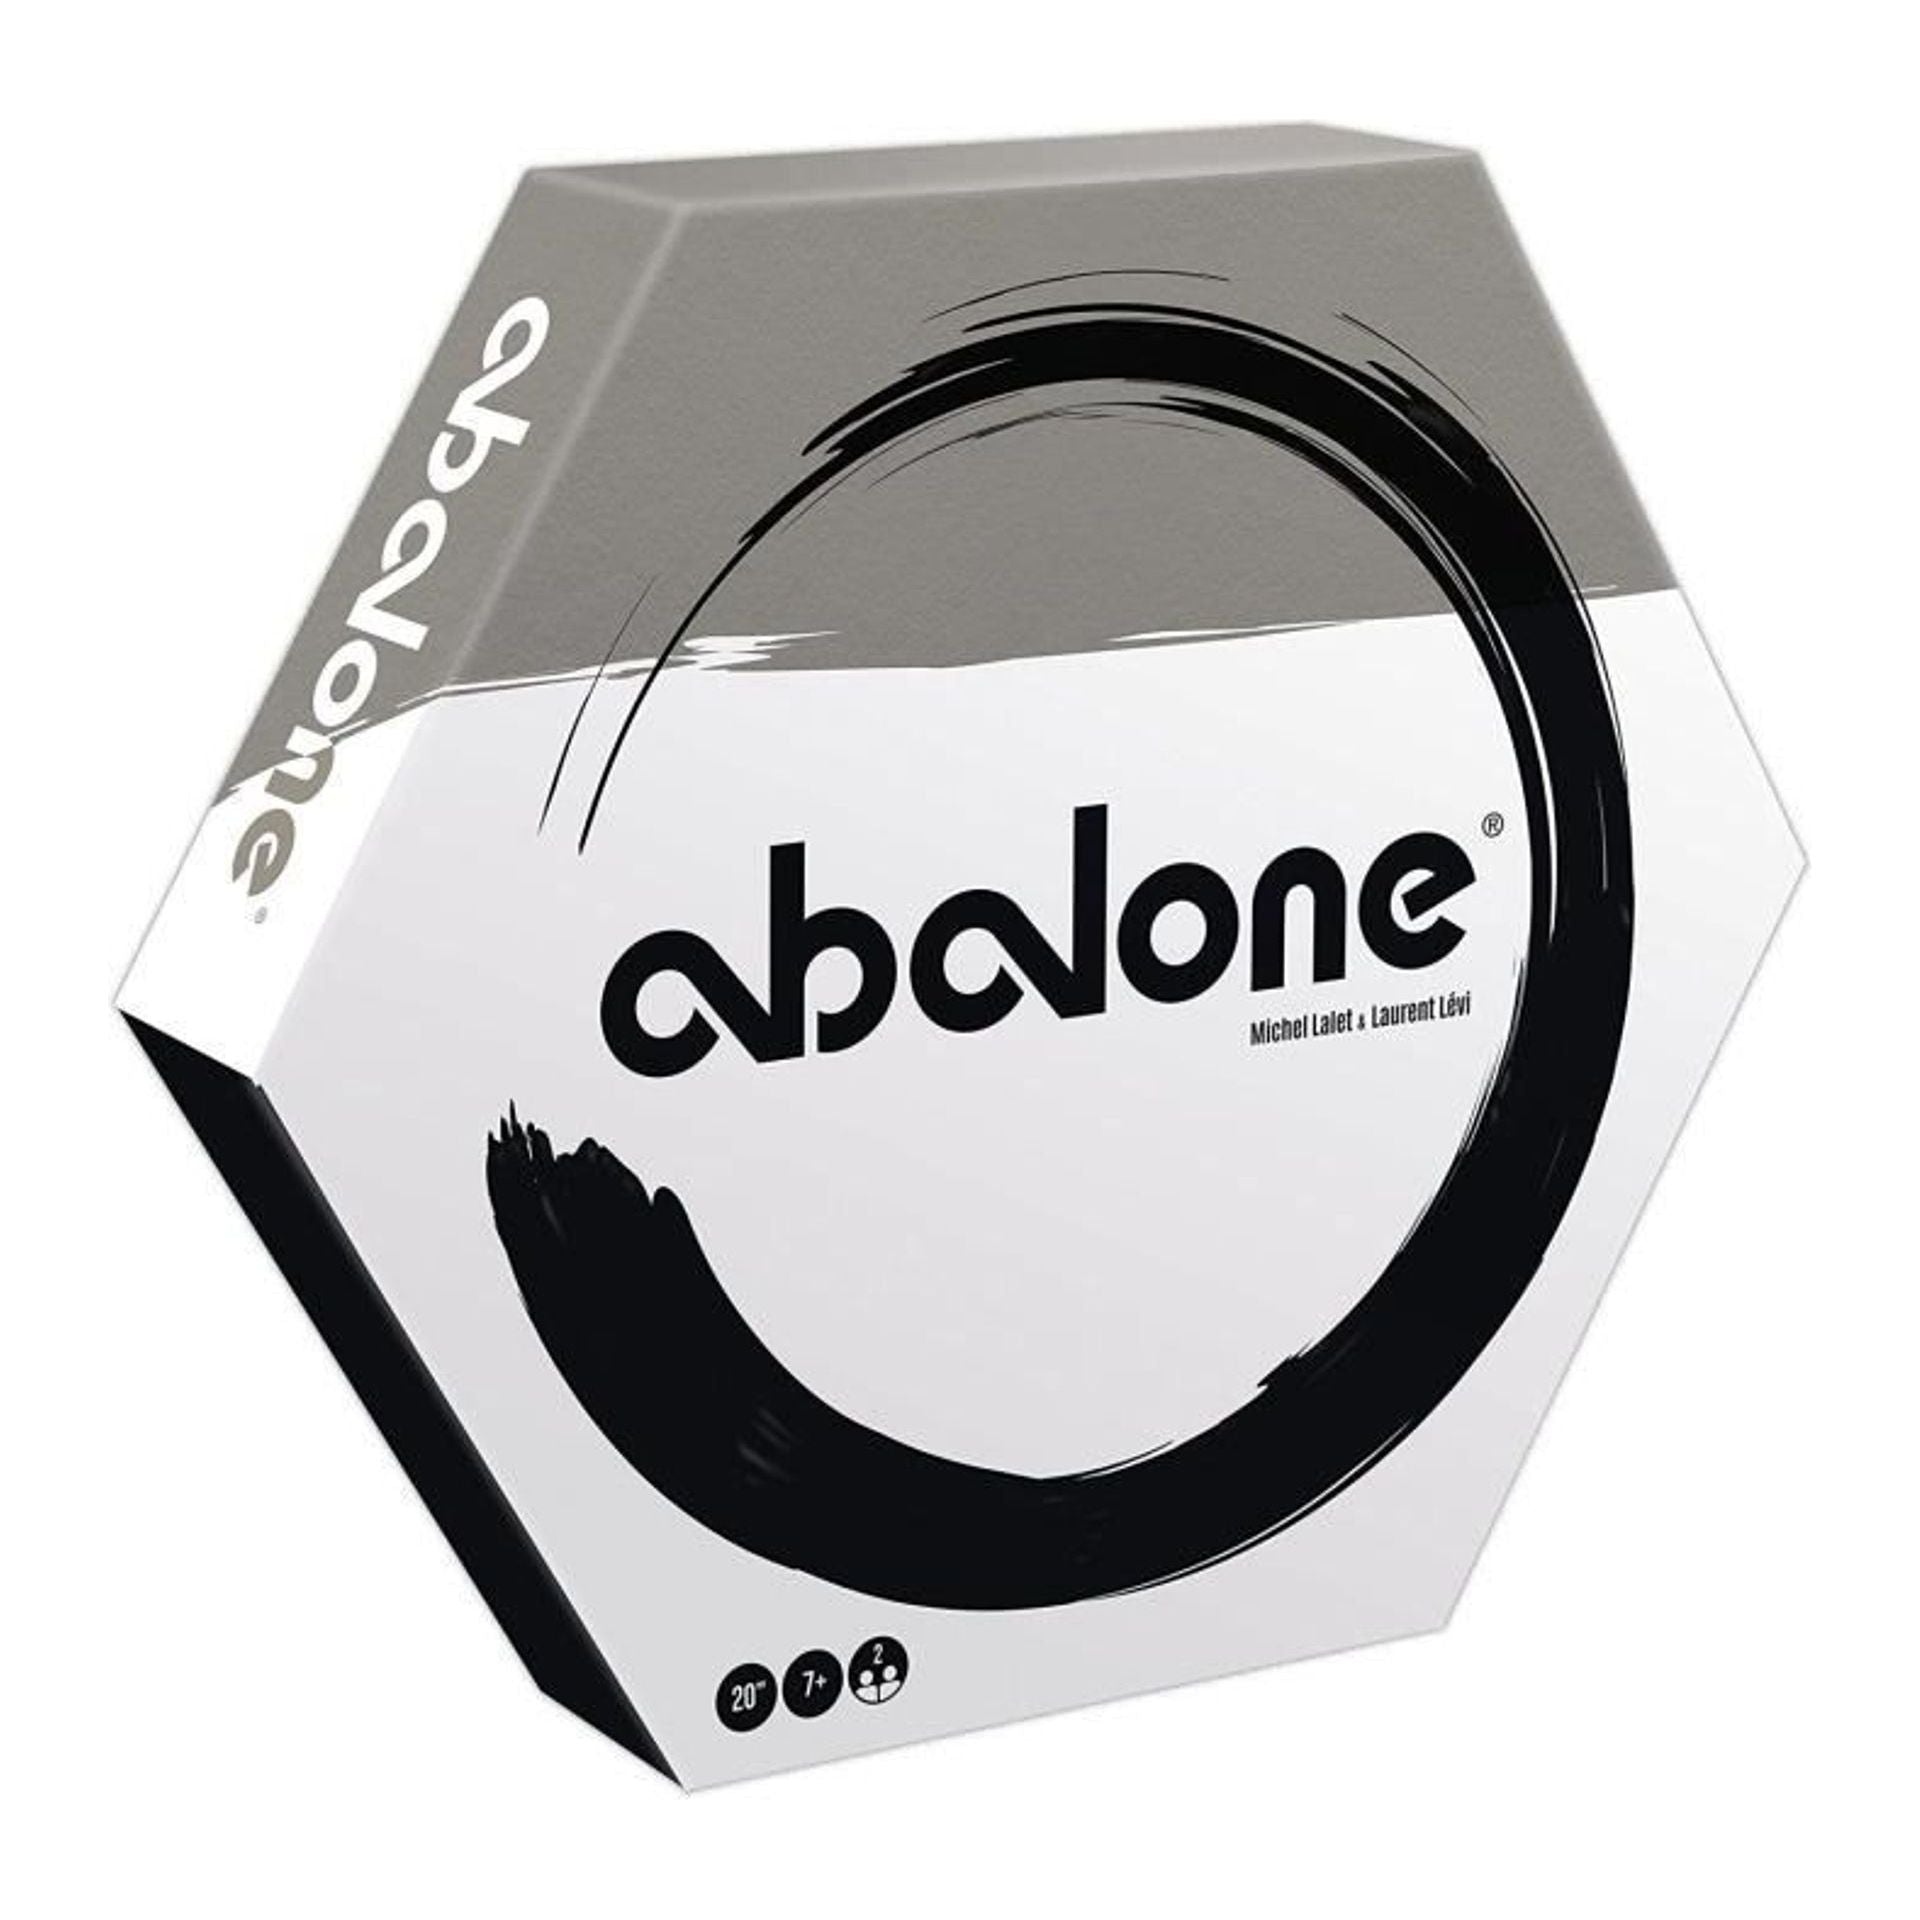 Abalone (redesigned)